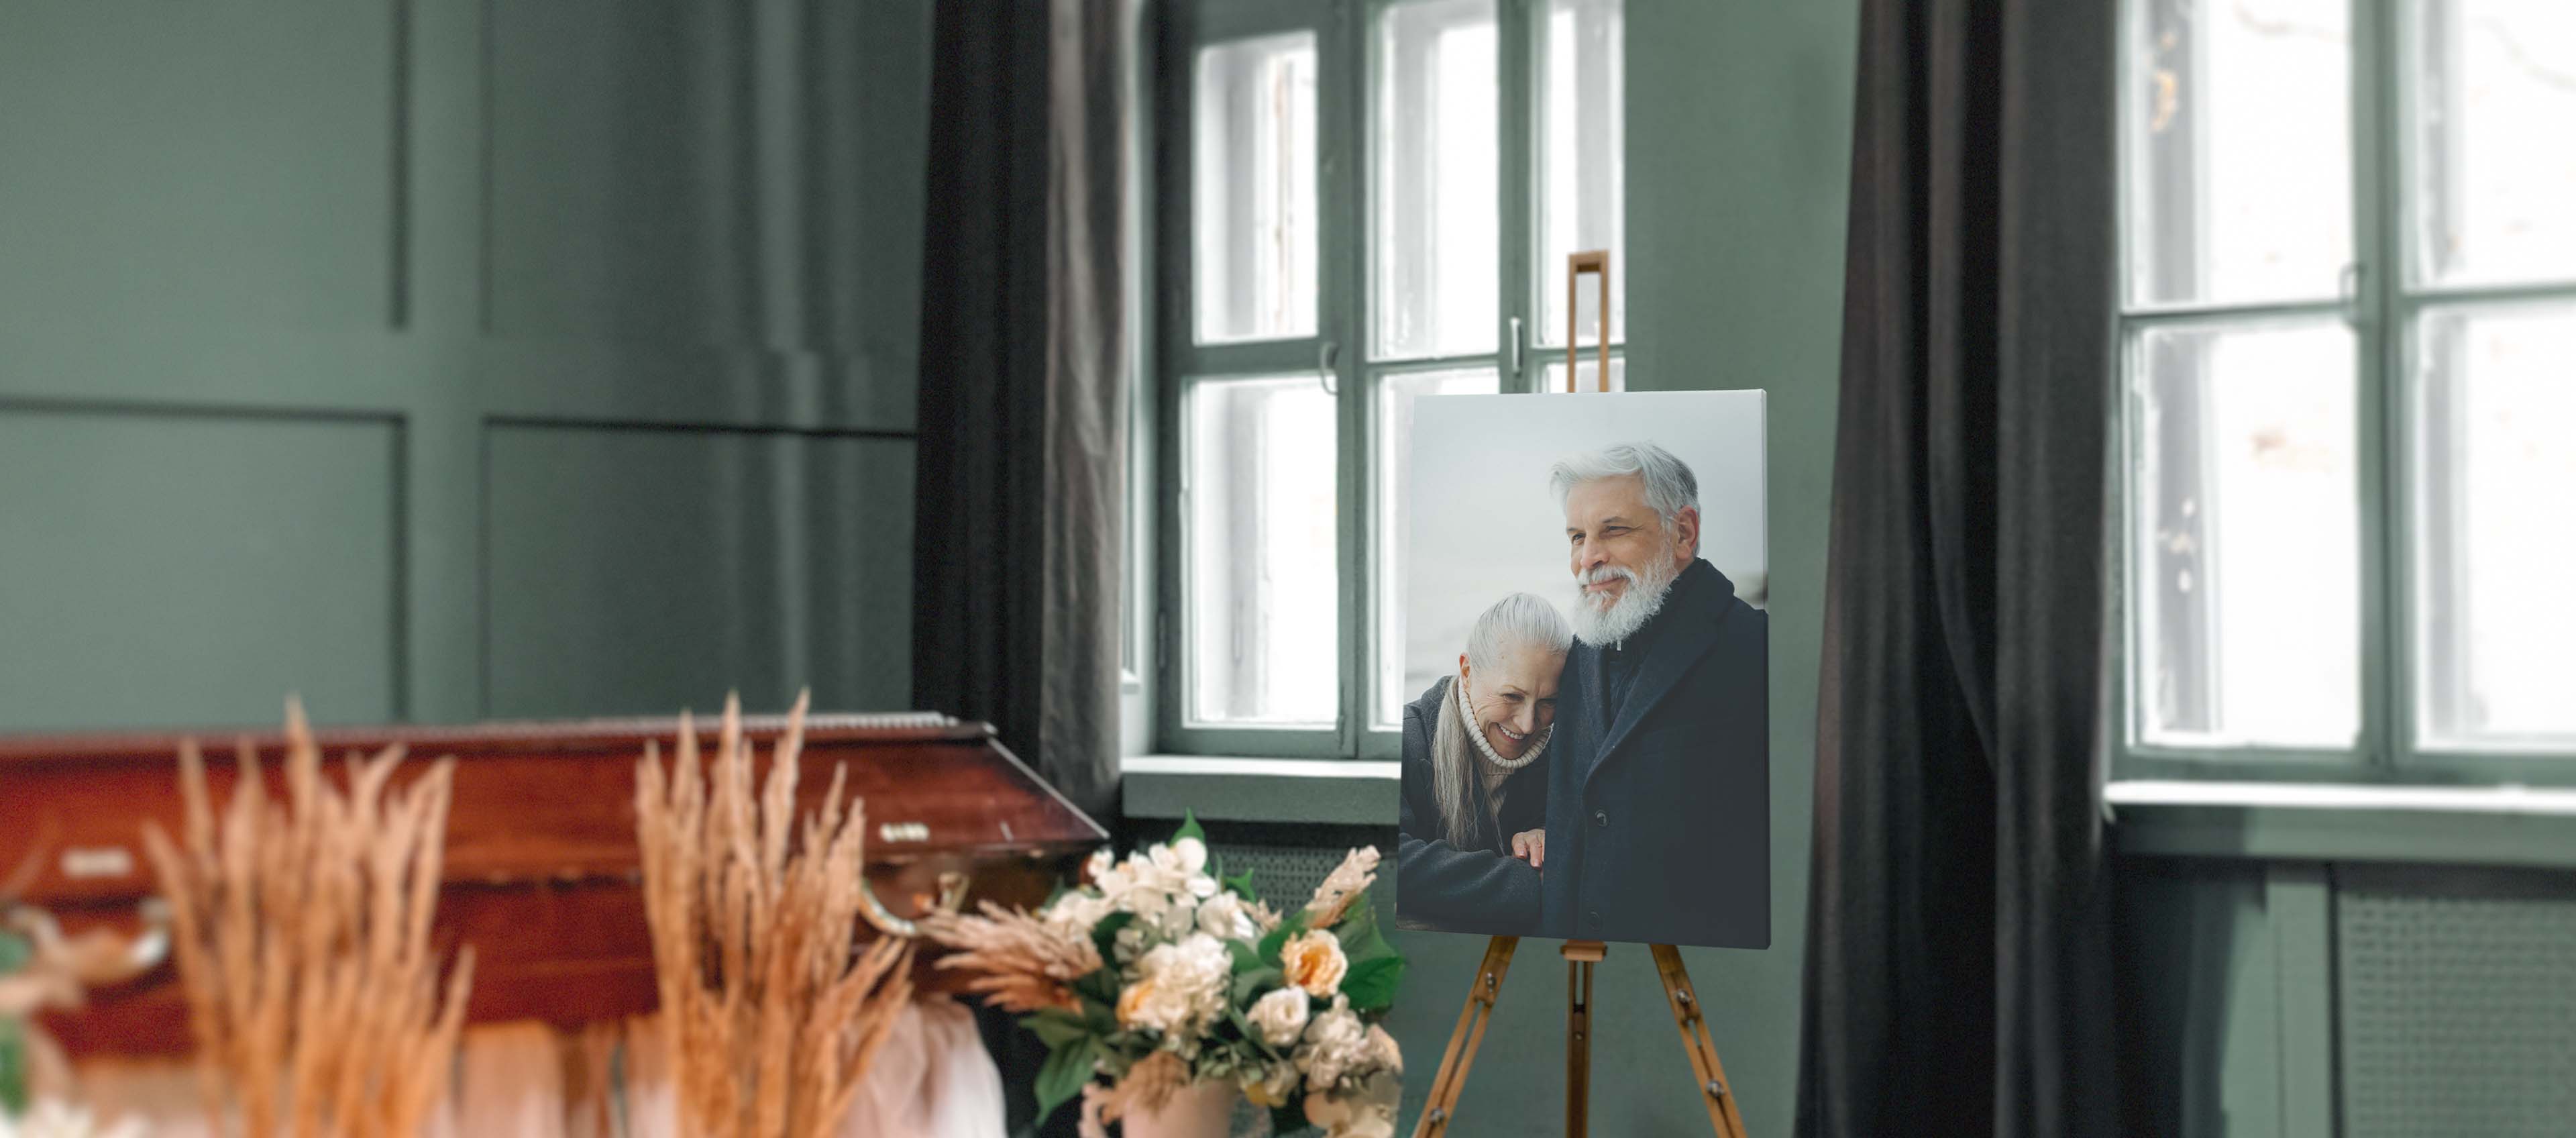 Canvas Print on easel at funeral service